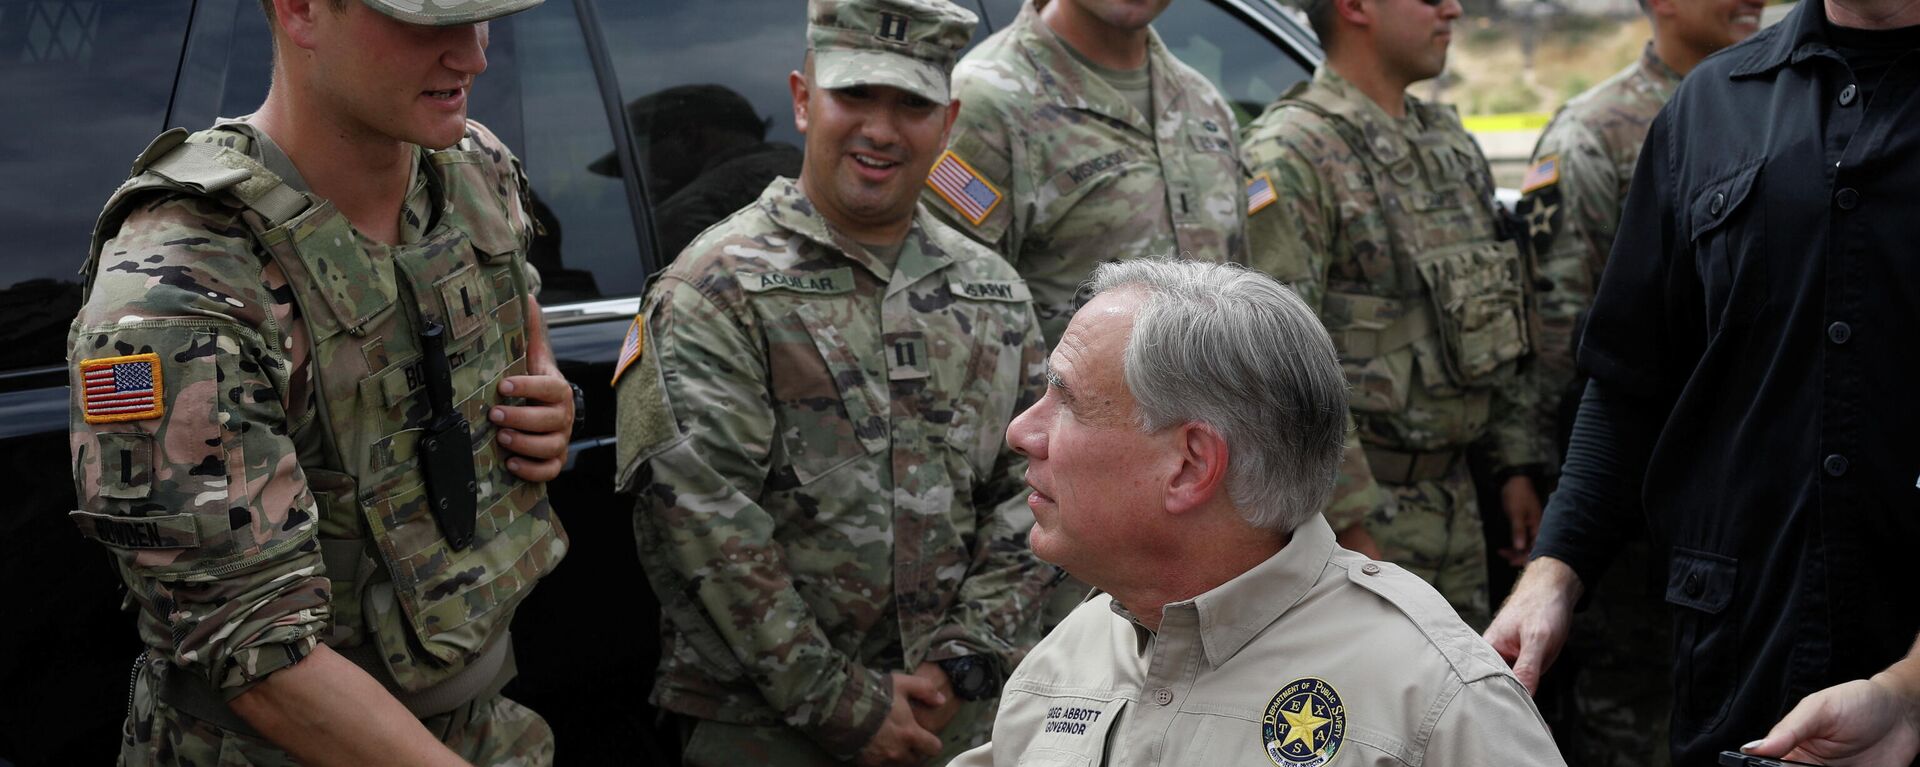 Texas Governor Gregg Abbott shakes hands with a U.S. Soldier after a news conference near the International Bridge between Mexico and the U.S., where migrants seeking asylum in the U.S. are waiting to be processed, in Del Rio, Texas, U.S., September 21, 2021 - Sputnik International, 1920, 21.09.2021